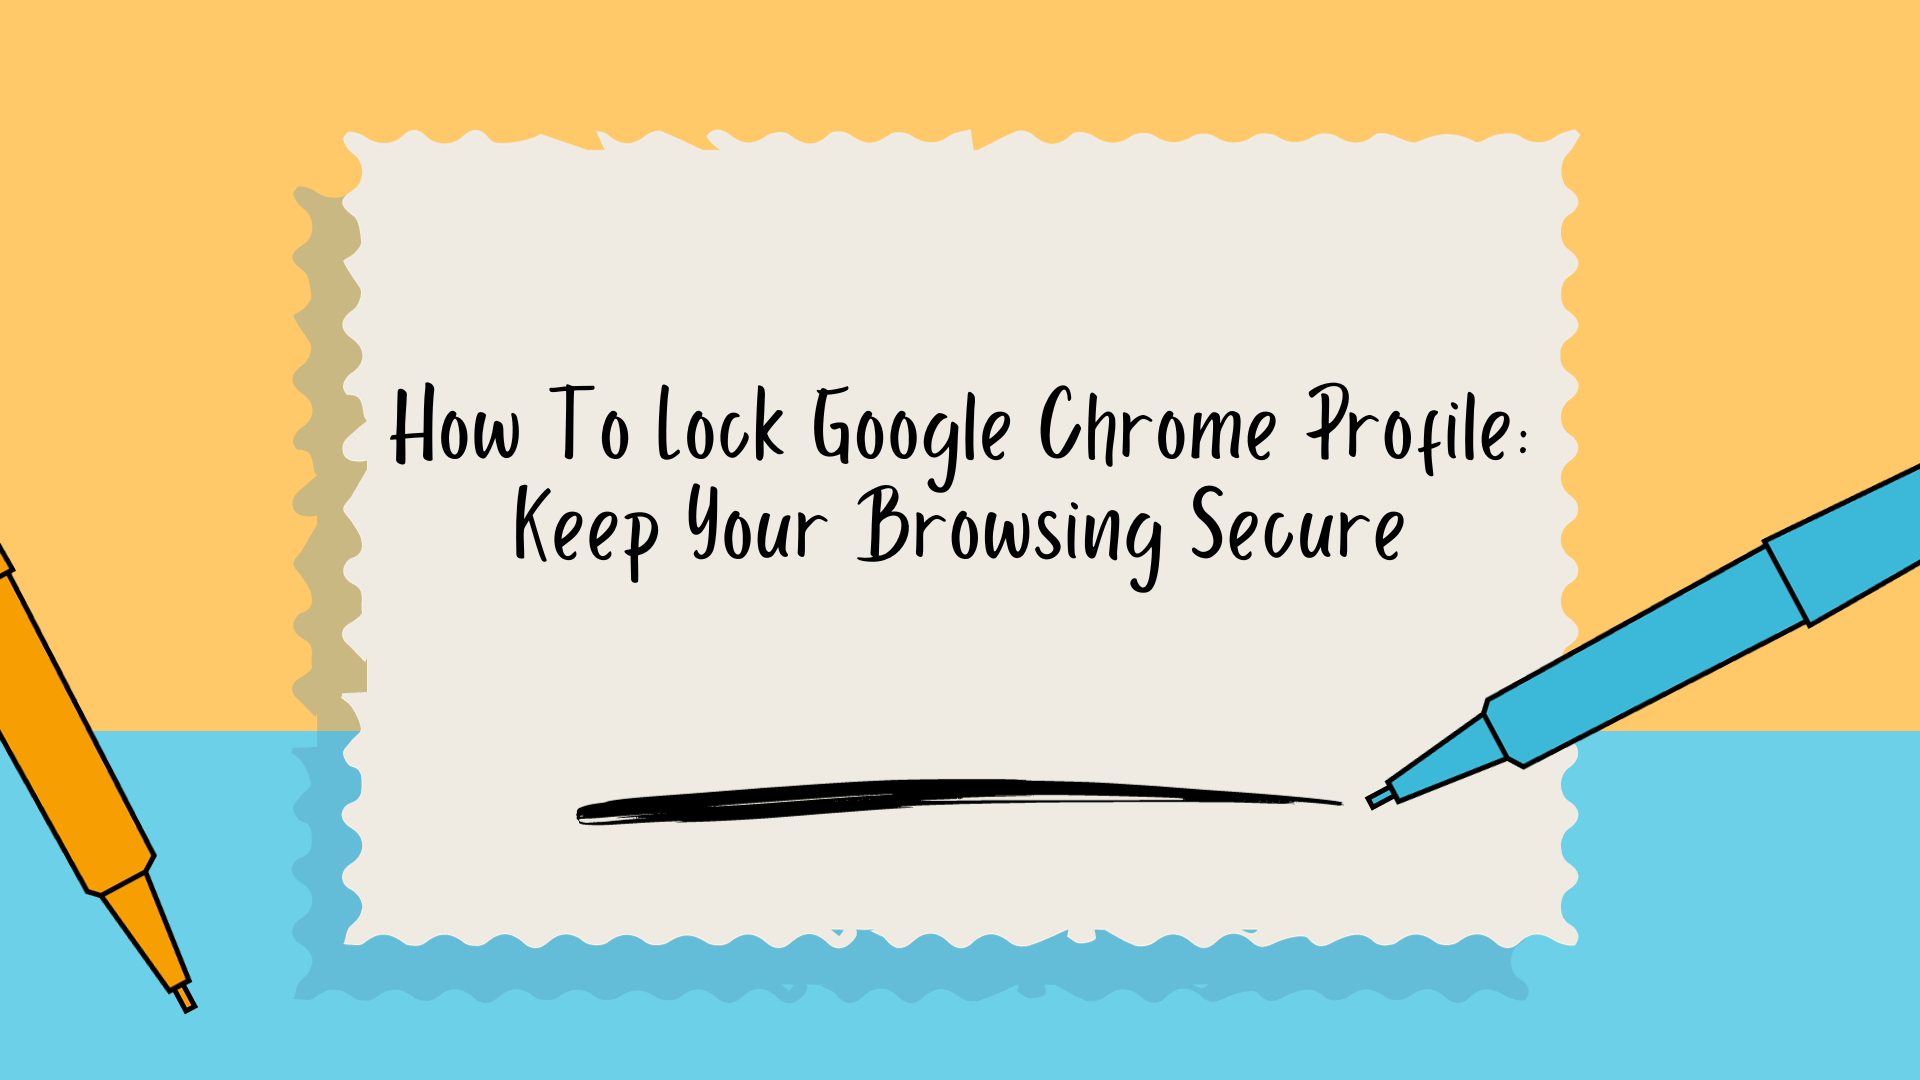 How To Lock Google Chrome Profile: Keep Your Browsing Secure